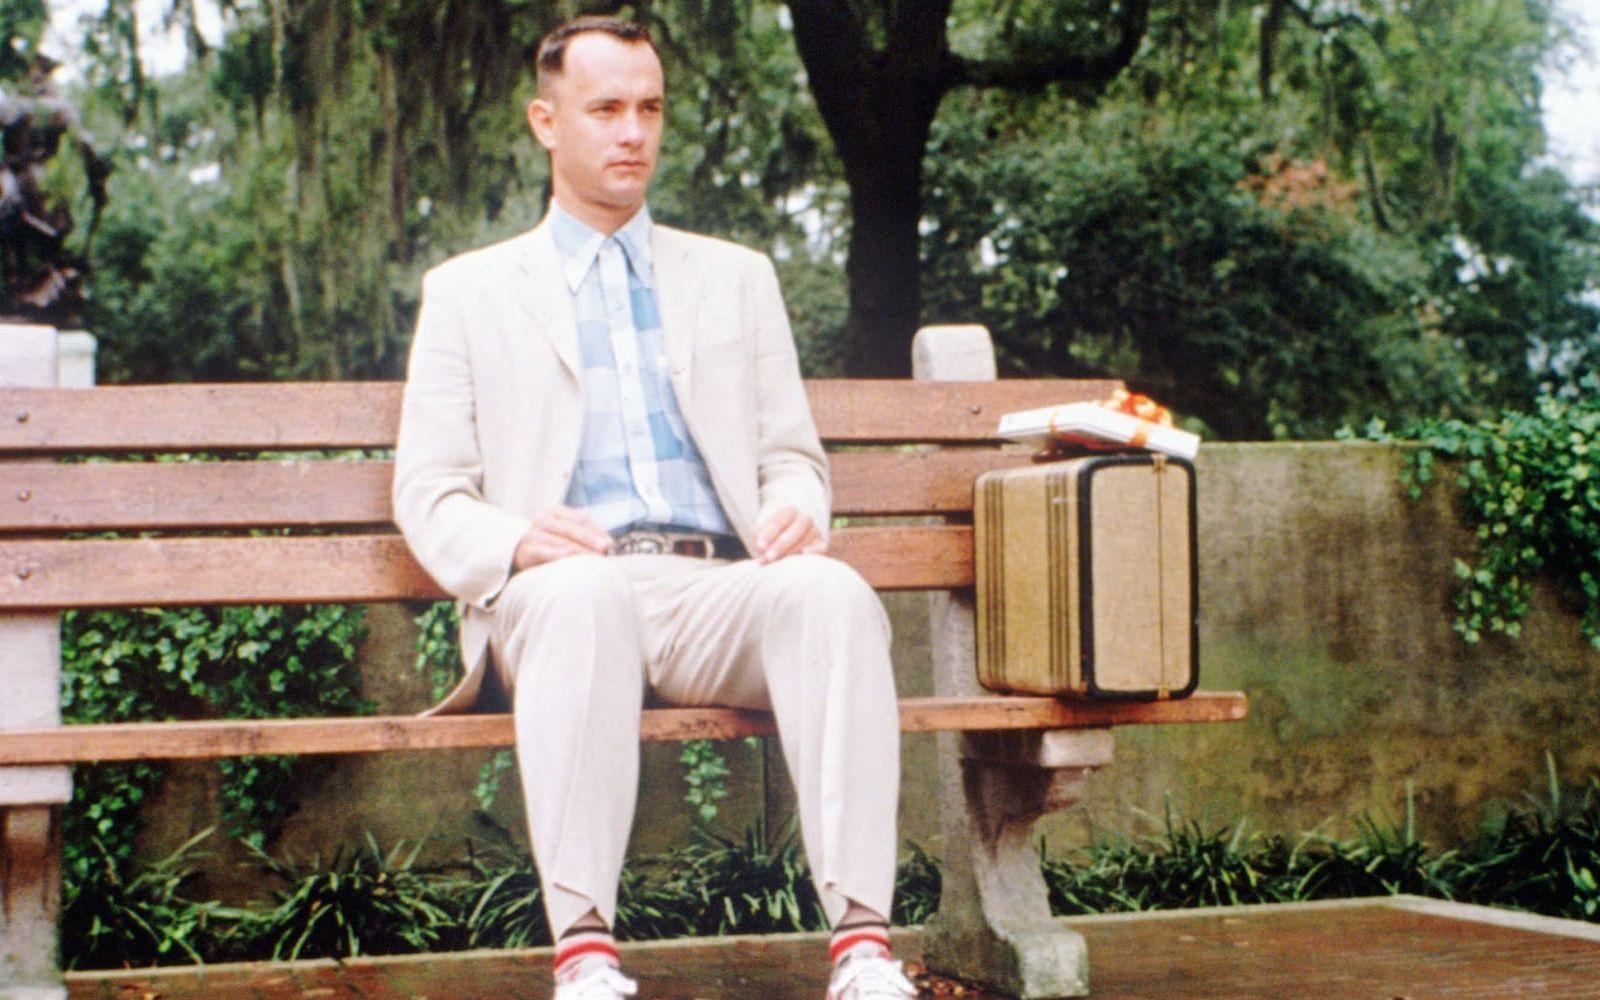 "My Mama always said, 'Life was like a box of chocolates; you never know what you're gonna get'" — Tom Hanks som Forrest Gump i Forrest Gump, 1994